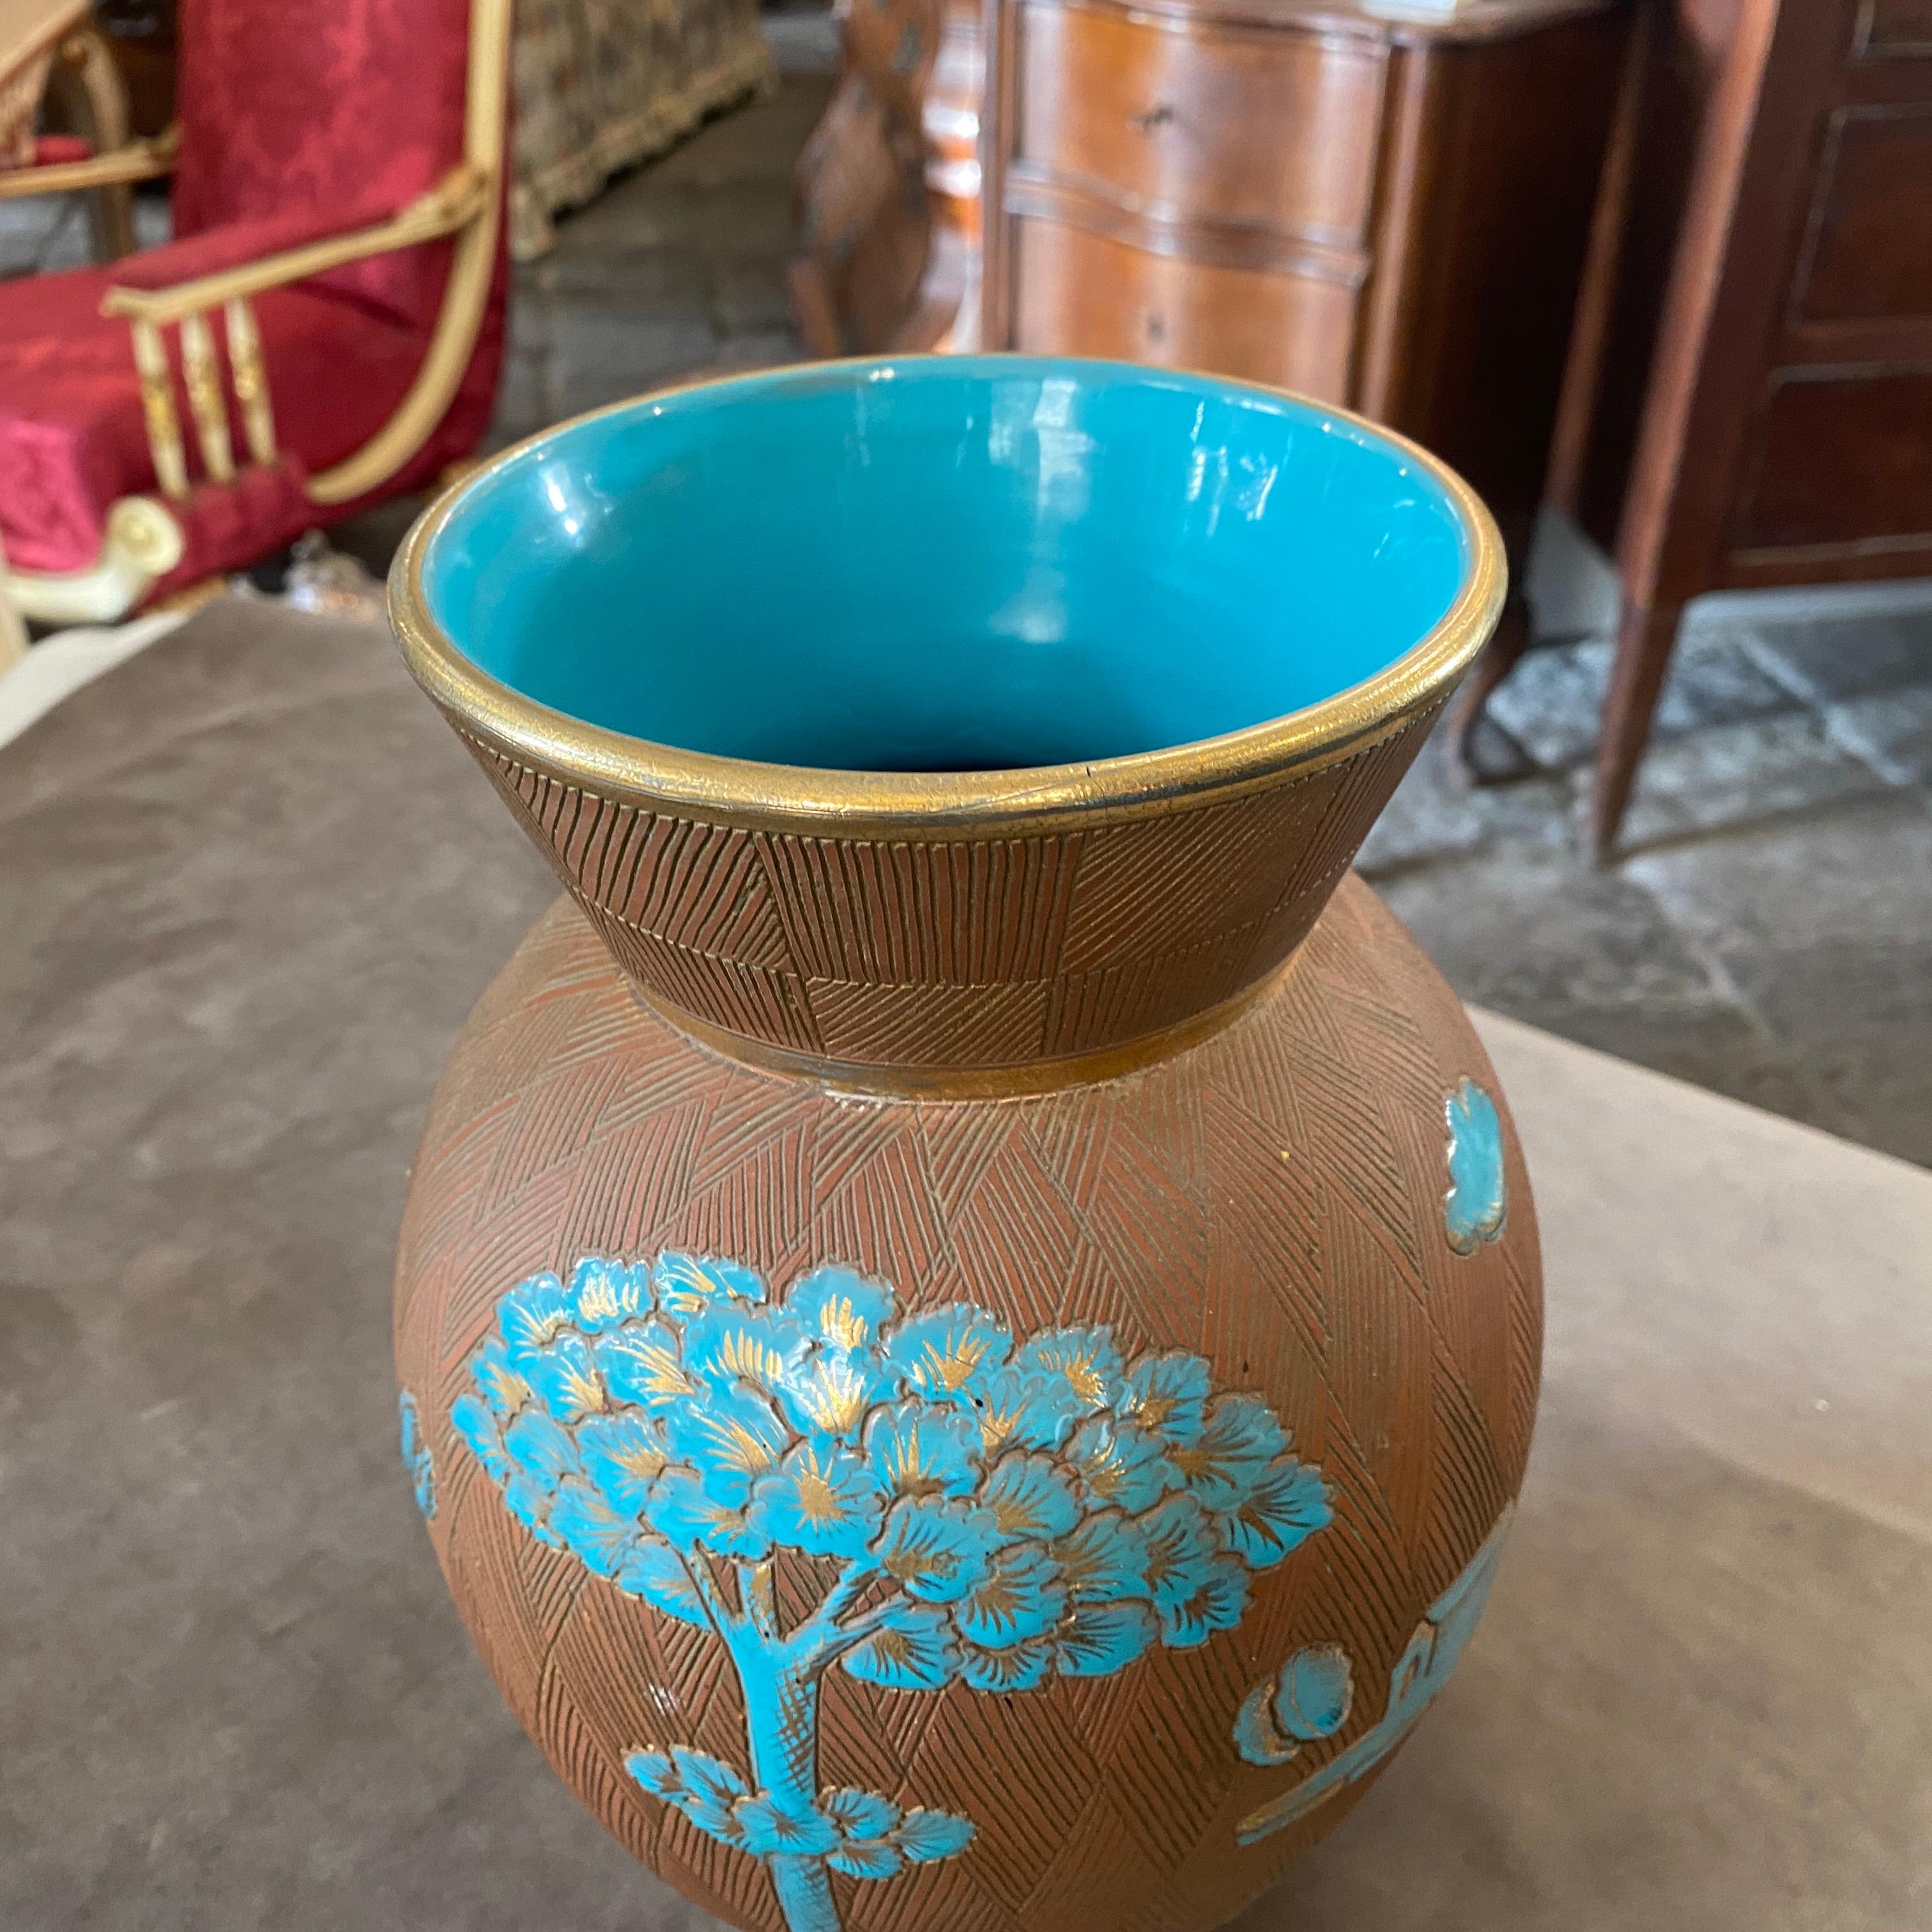 Hand-Painted 1950s Mid-Century Modern Blue and Brown Ceramic Italian Vase by Fantechi